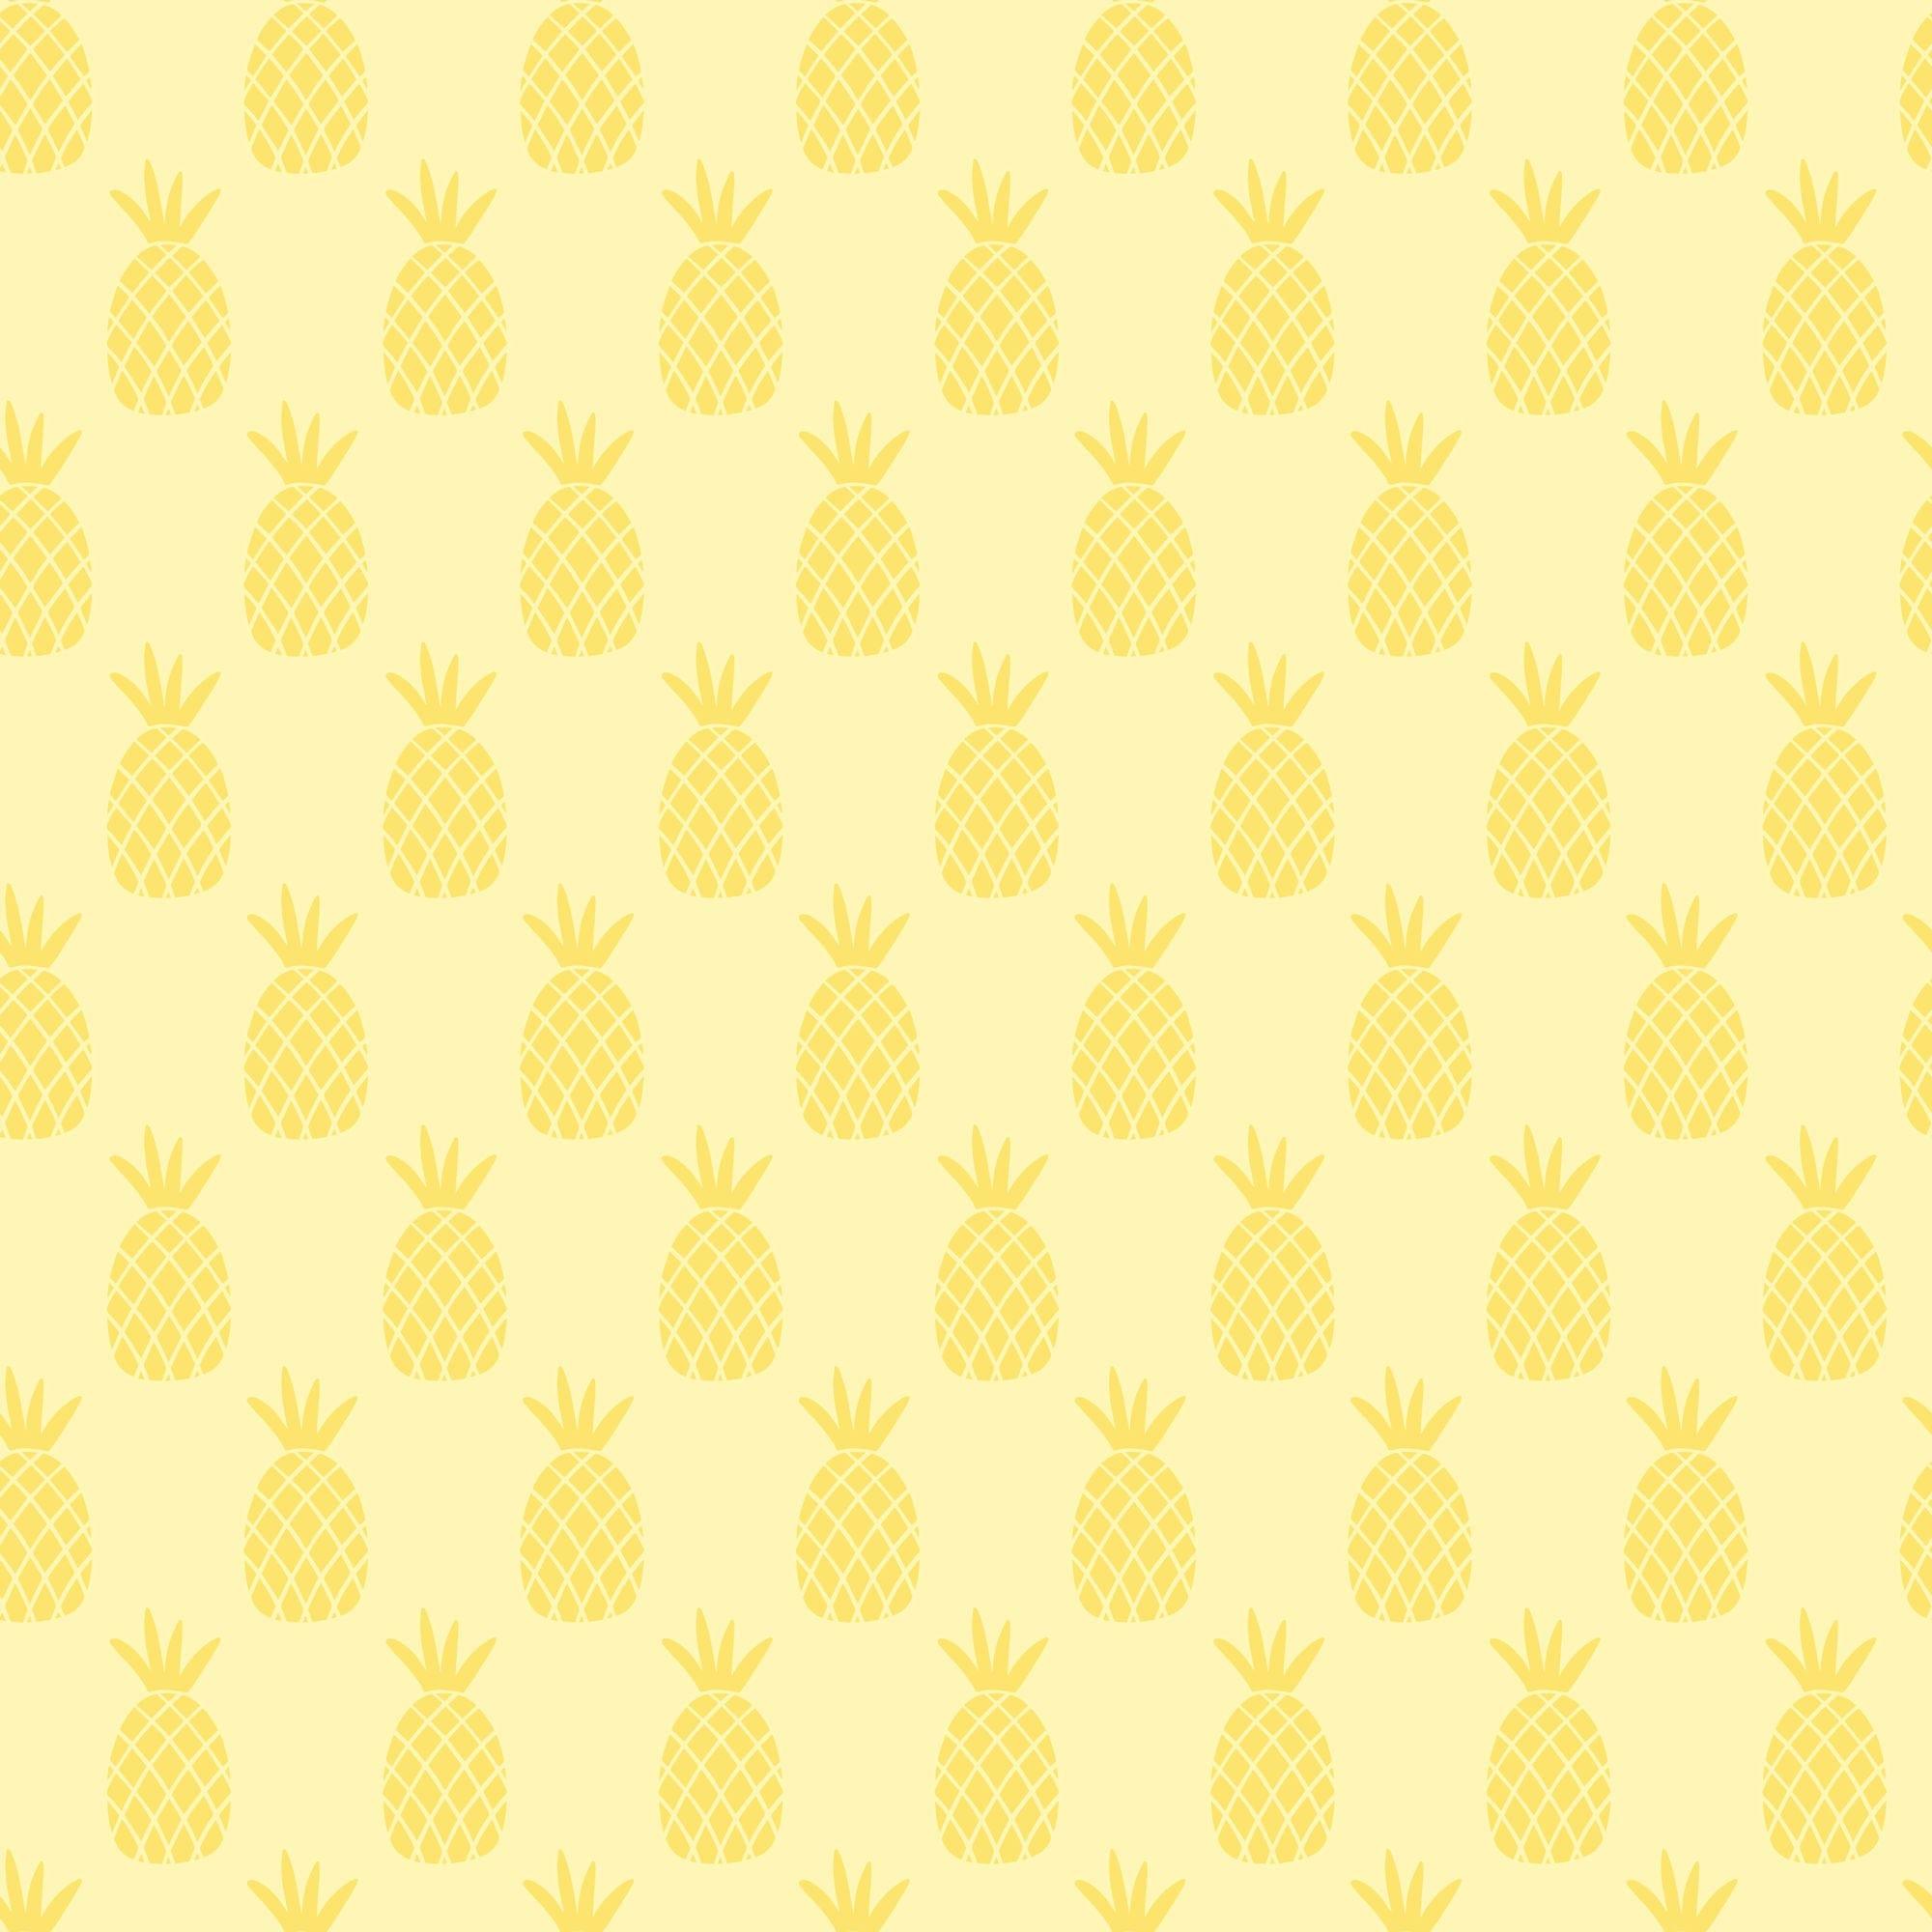 Sunkissed Collection Pineapples 12 x 12 Double-Sided Scrapbook Paper by SSC Designs - Scrapbook Supply Companies